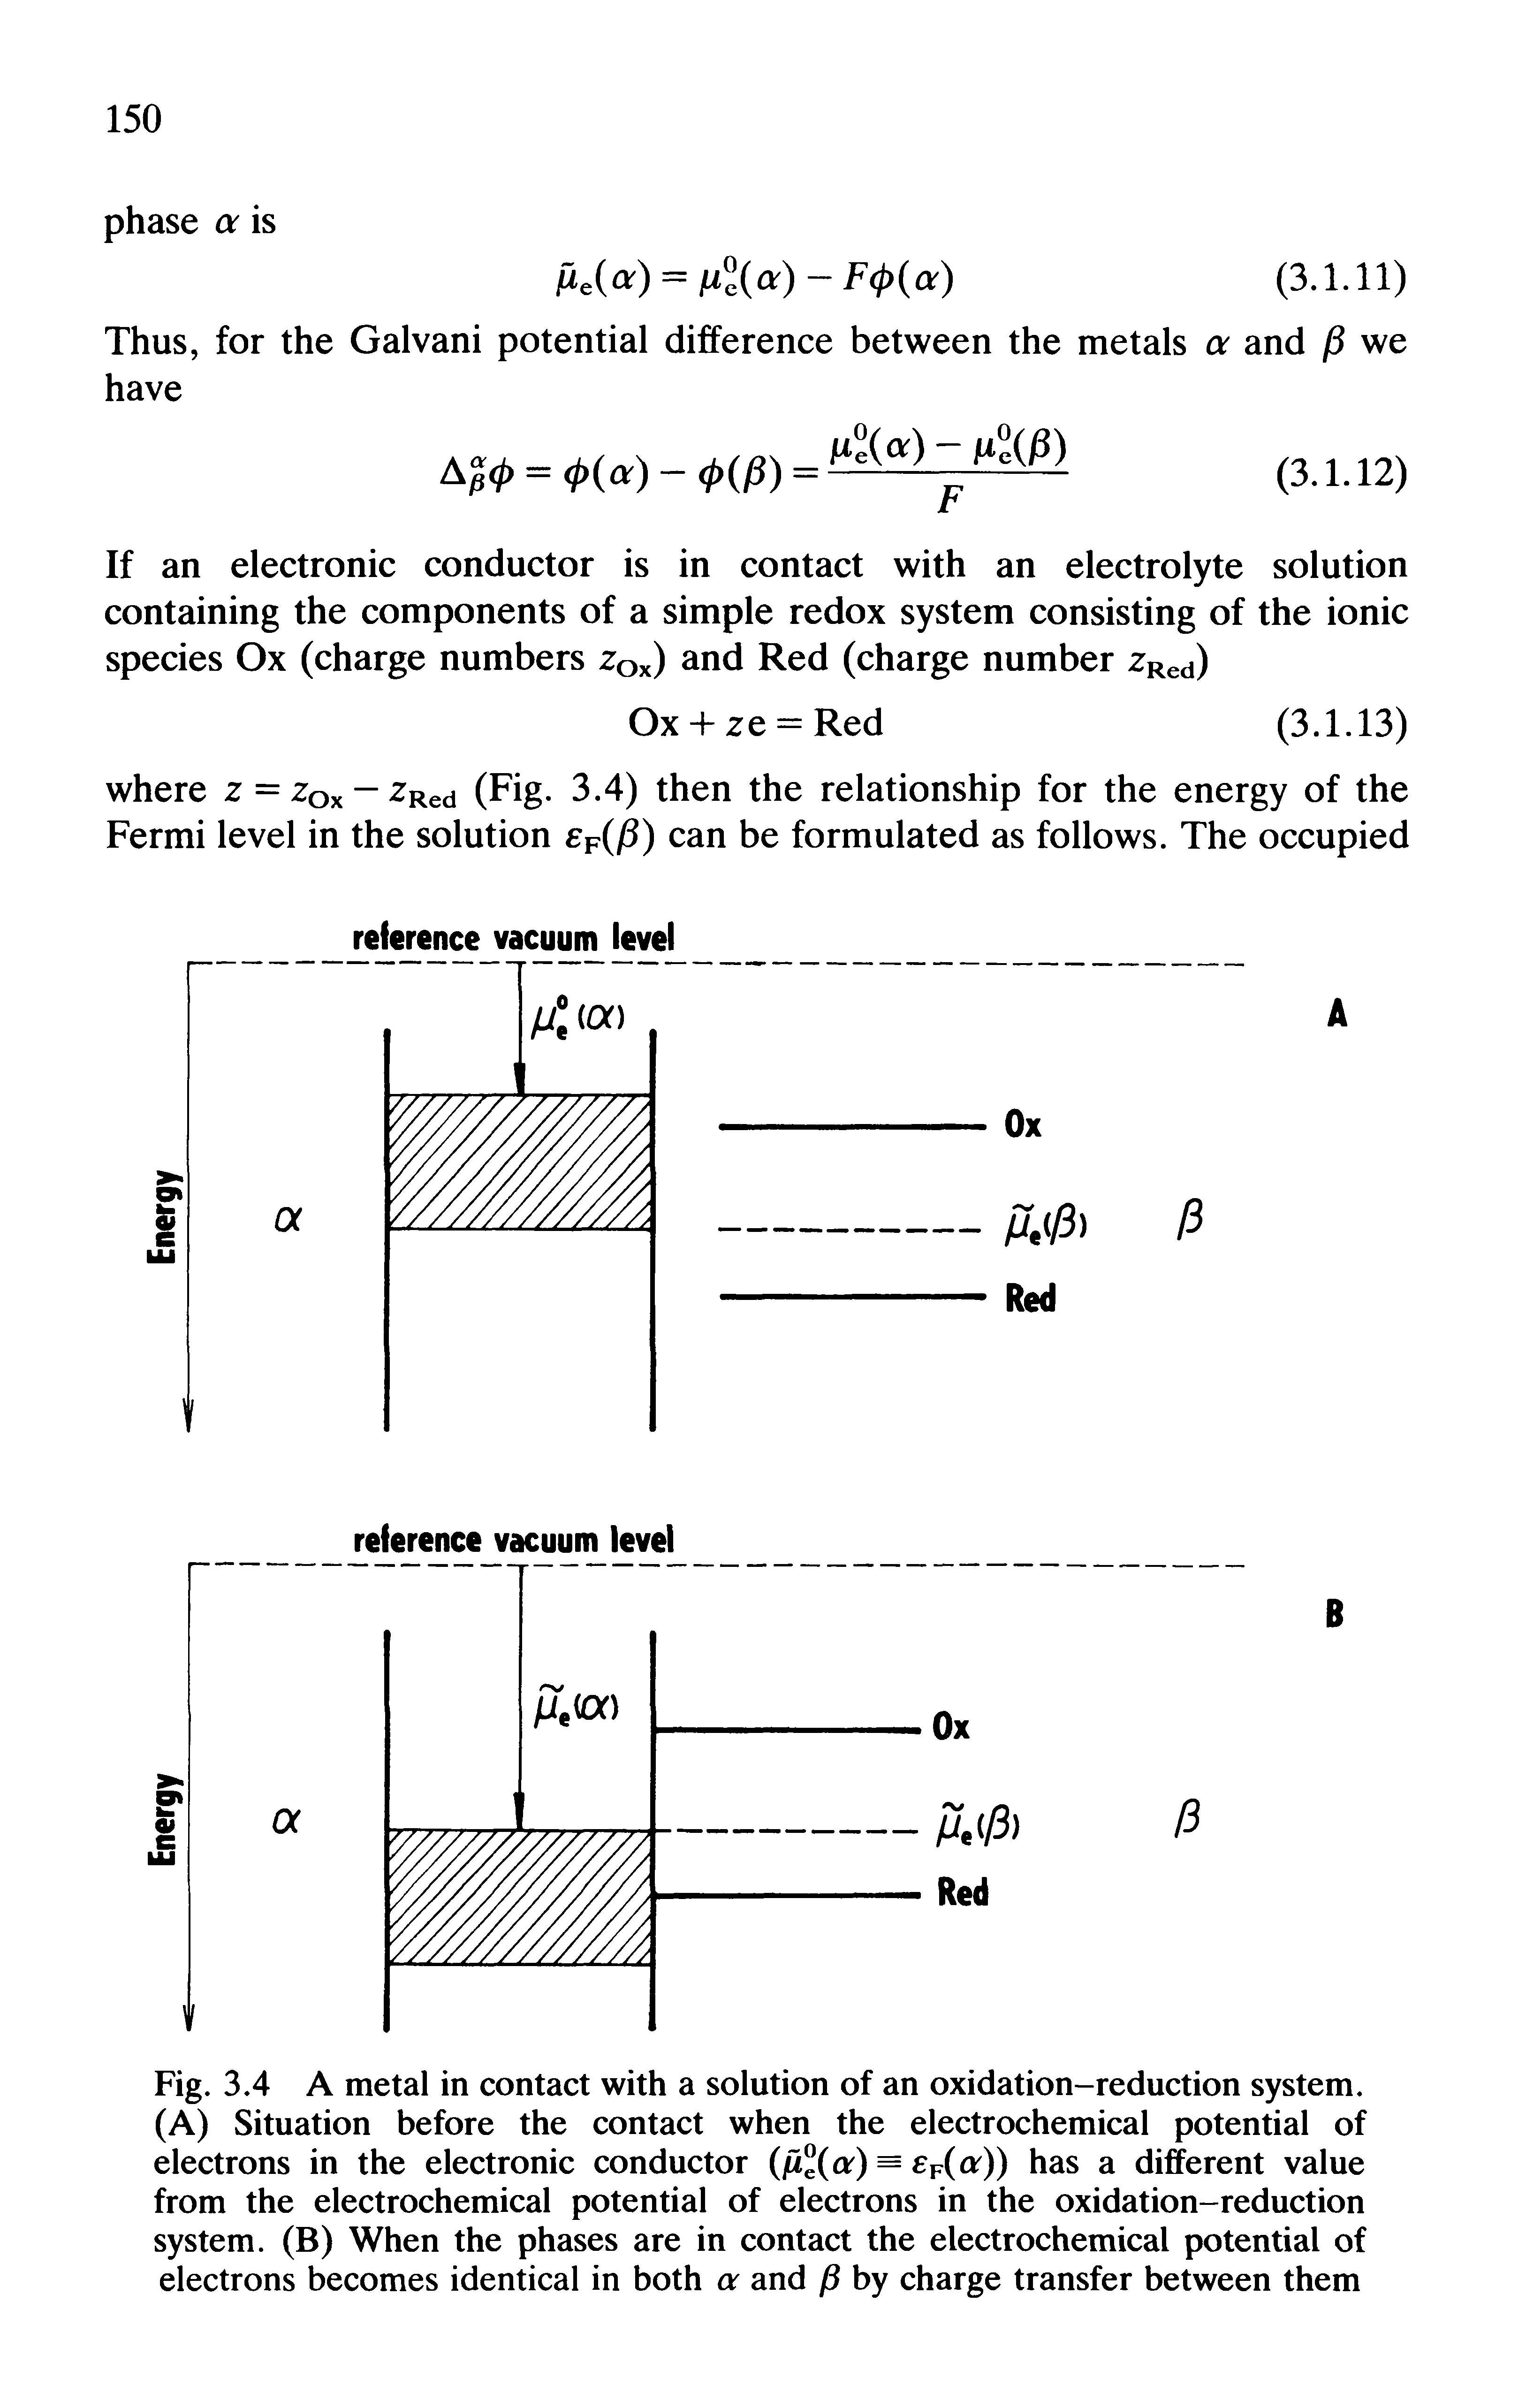 Fig. 3.4 A metal in contact with a solution of an oxidation-reduction system. (A) Situation before the contact when the electrochemical potential of electrons in the electronic conductor (fiXa) = f(< )) has a different value from the electrochemical potential of electrons in the oxidation-reduction system. (B) When the phases are in contact the electrochemical potential of electrons becomes identical in both a and by charge transfer between them...